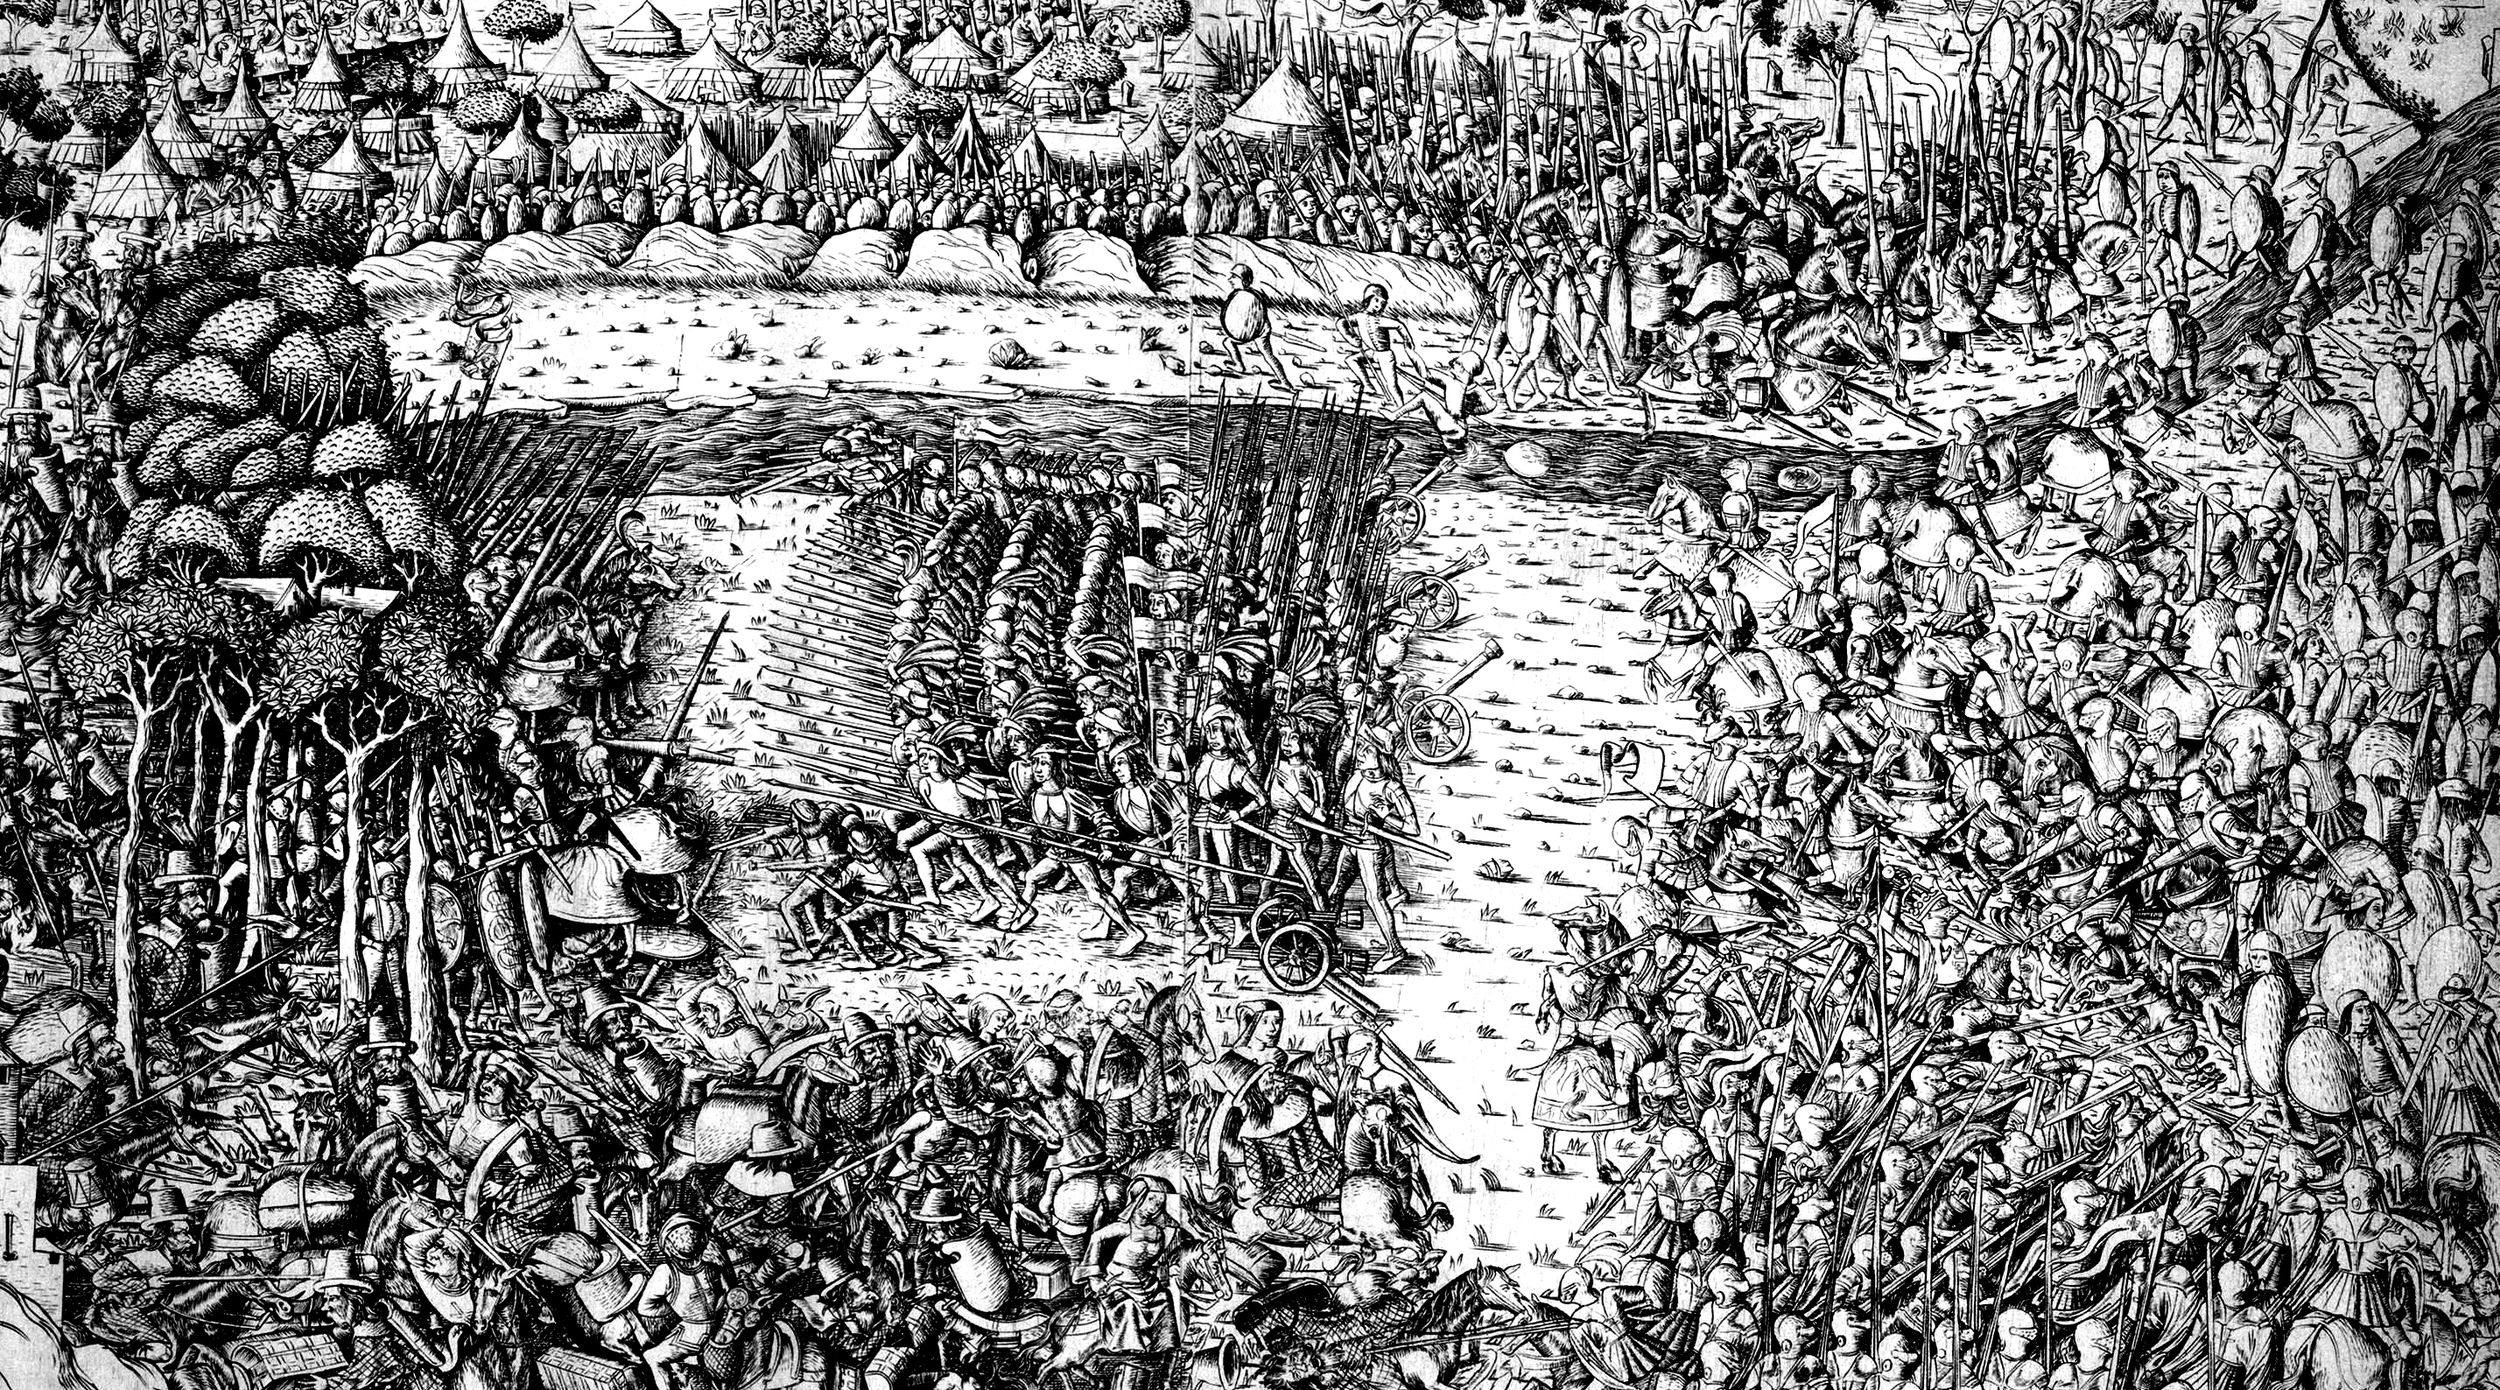 Engraved only a year after the battle, this much-detailed rendition by a German artist is thought to be based on Swiss eyewitness accounts and is considered remarkably accurate.  It shows the Swiss pikmen, right, facing Italian knights, while in the foreground the Swiss and Balkan stradiot skirmishers engage in fierce hand-to-hand combat.